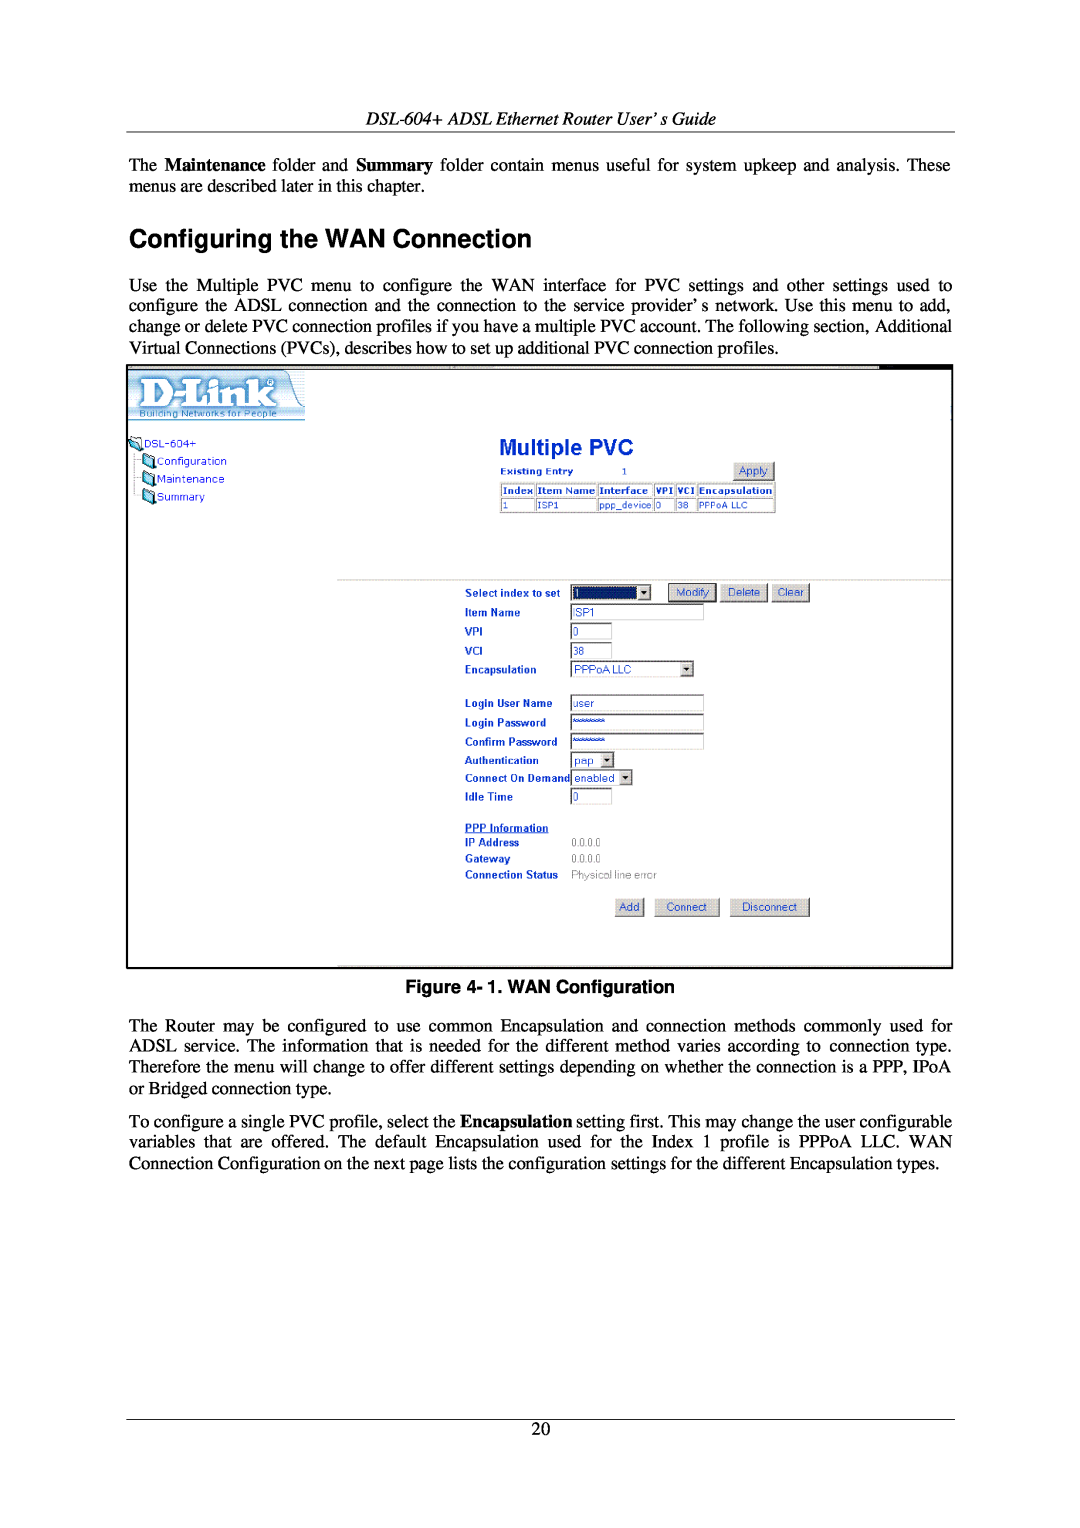 D-Link manual Configuring the WAN Connection, DSL-604+ ADSL Ethernet Router User’s Guide, 1. WAN Configuration 